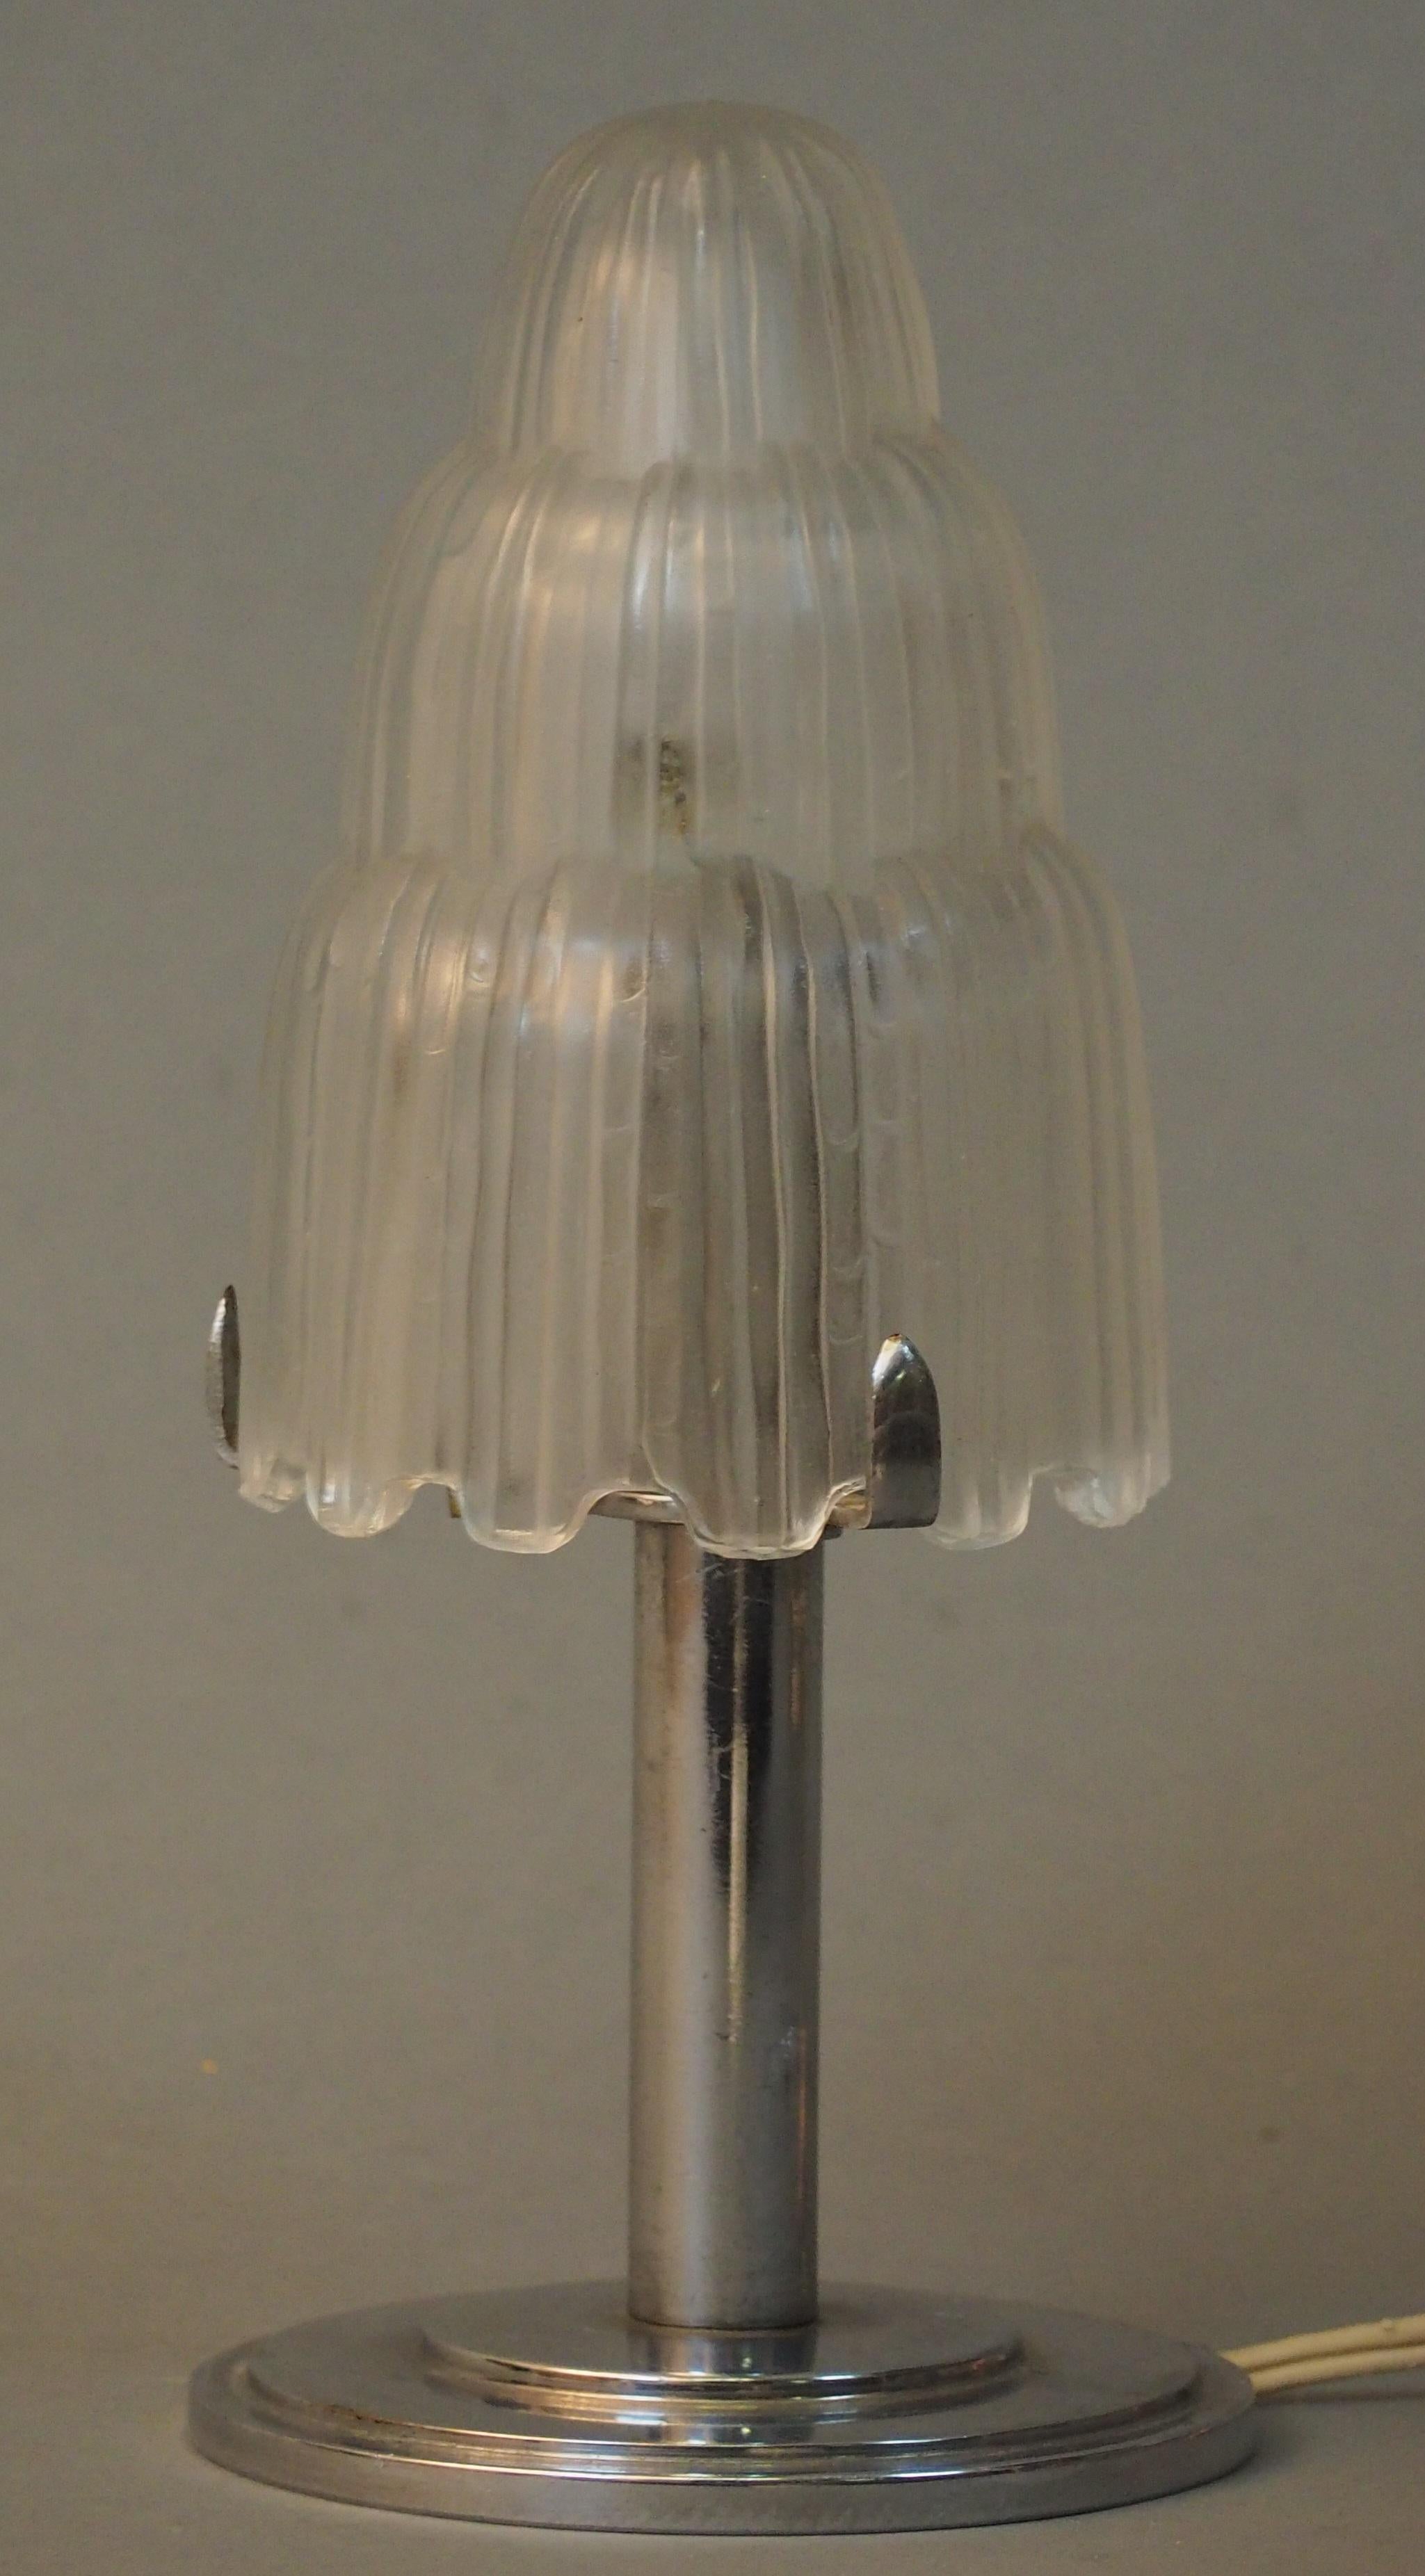 A beautiful and lovely nickeled bronze and glass table lamp by Sabino, France, Paris, circa 1930s.
The amp is signed on the bottom and on the glass shade with 